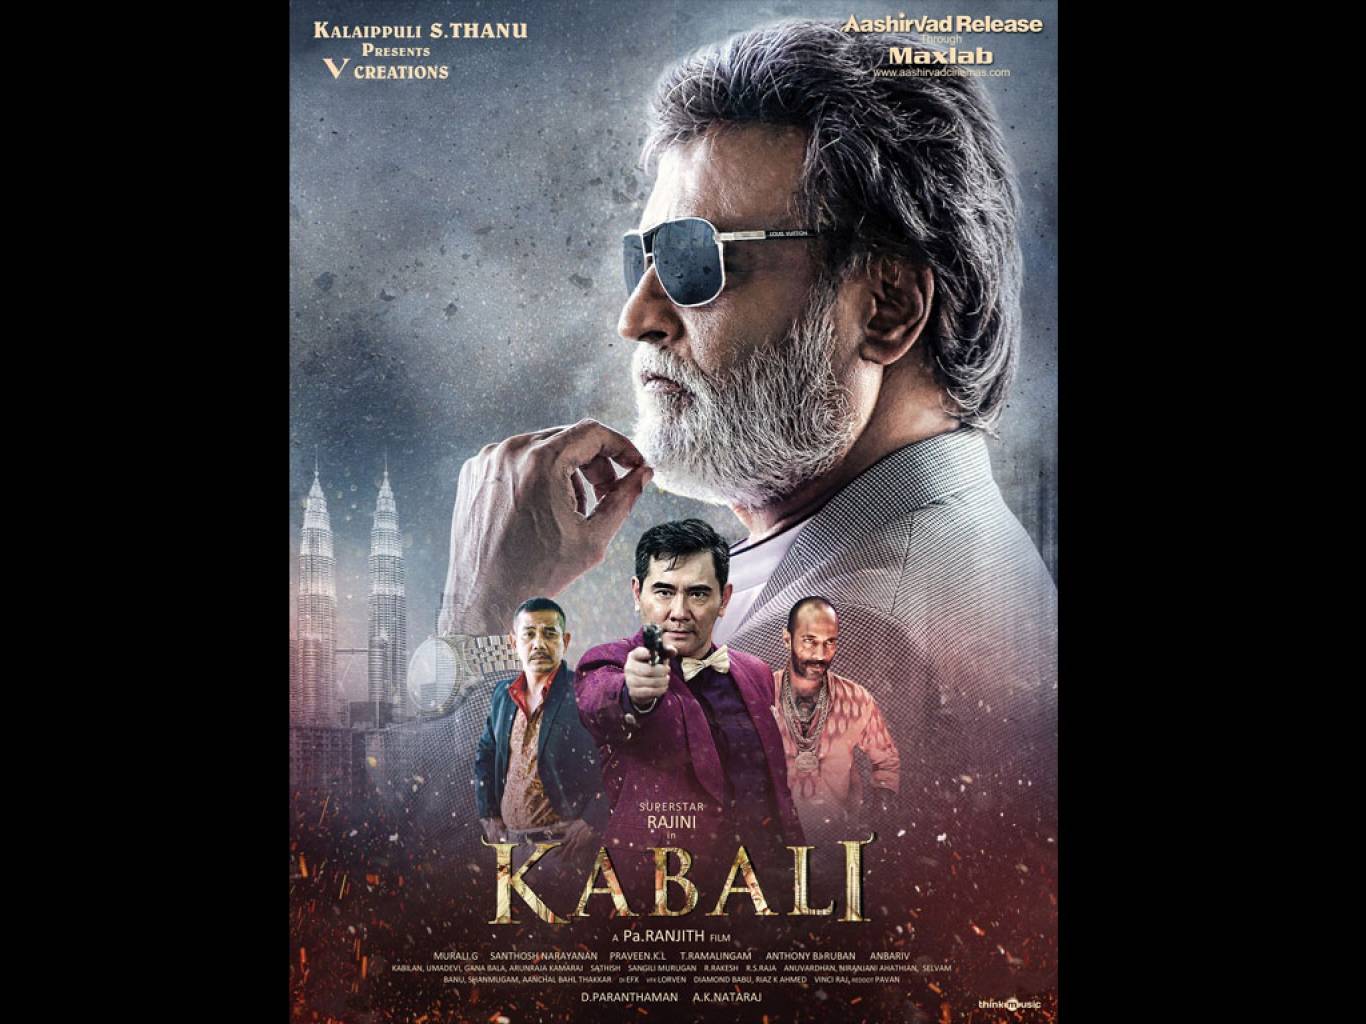 kabali hd wallpapers 1080p,movie,poster,action film,album cover,photo caption